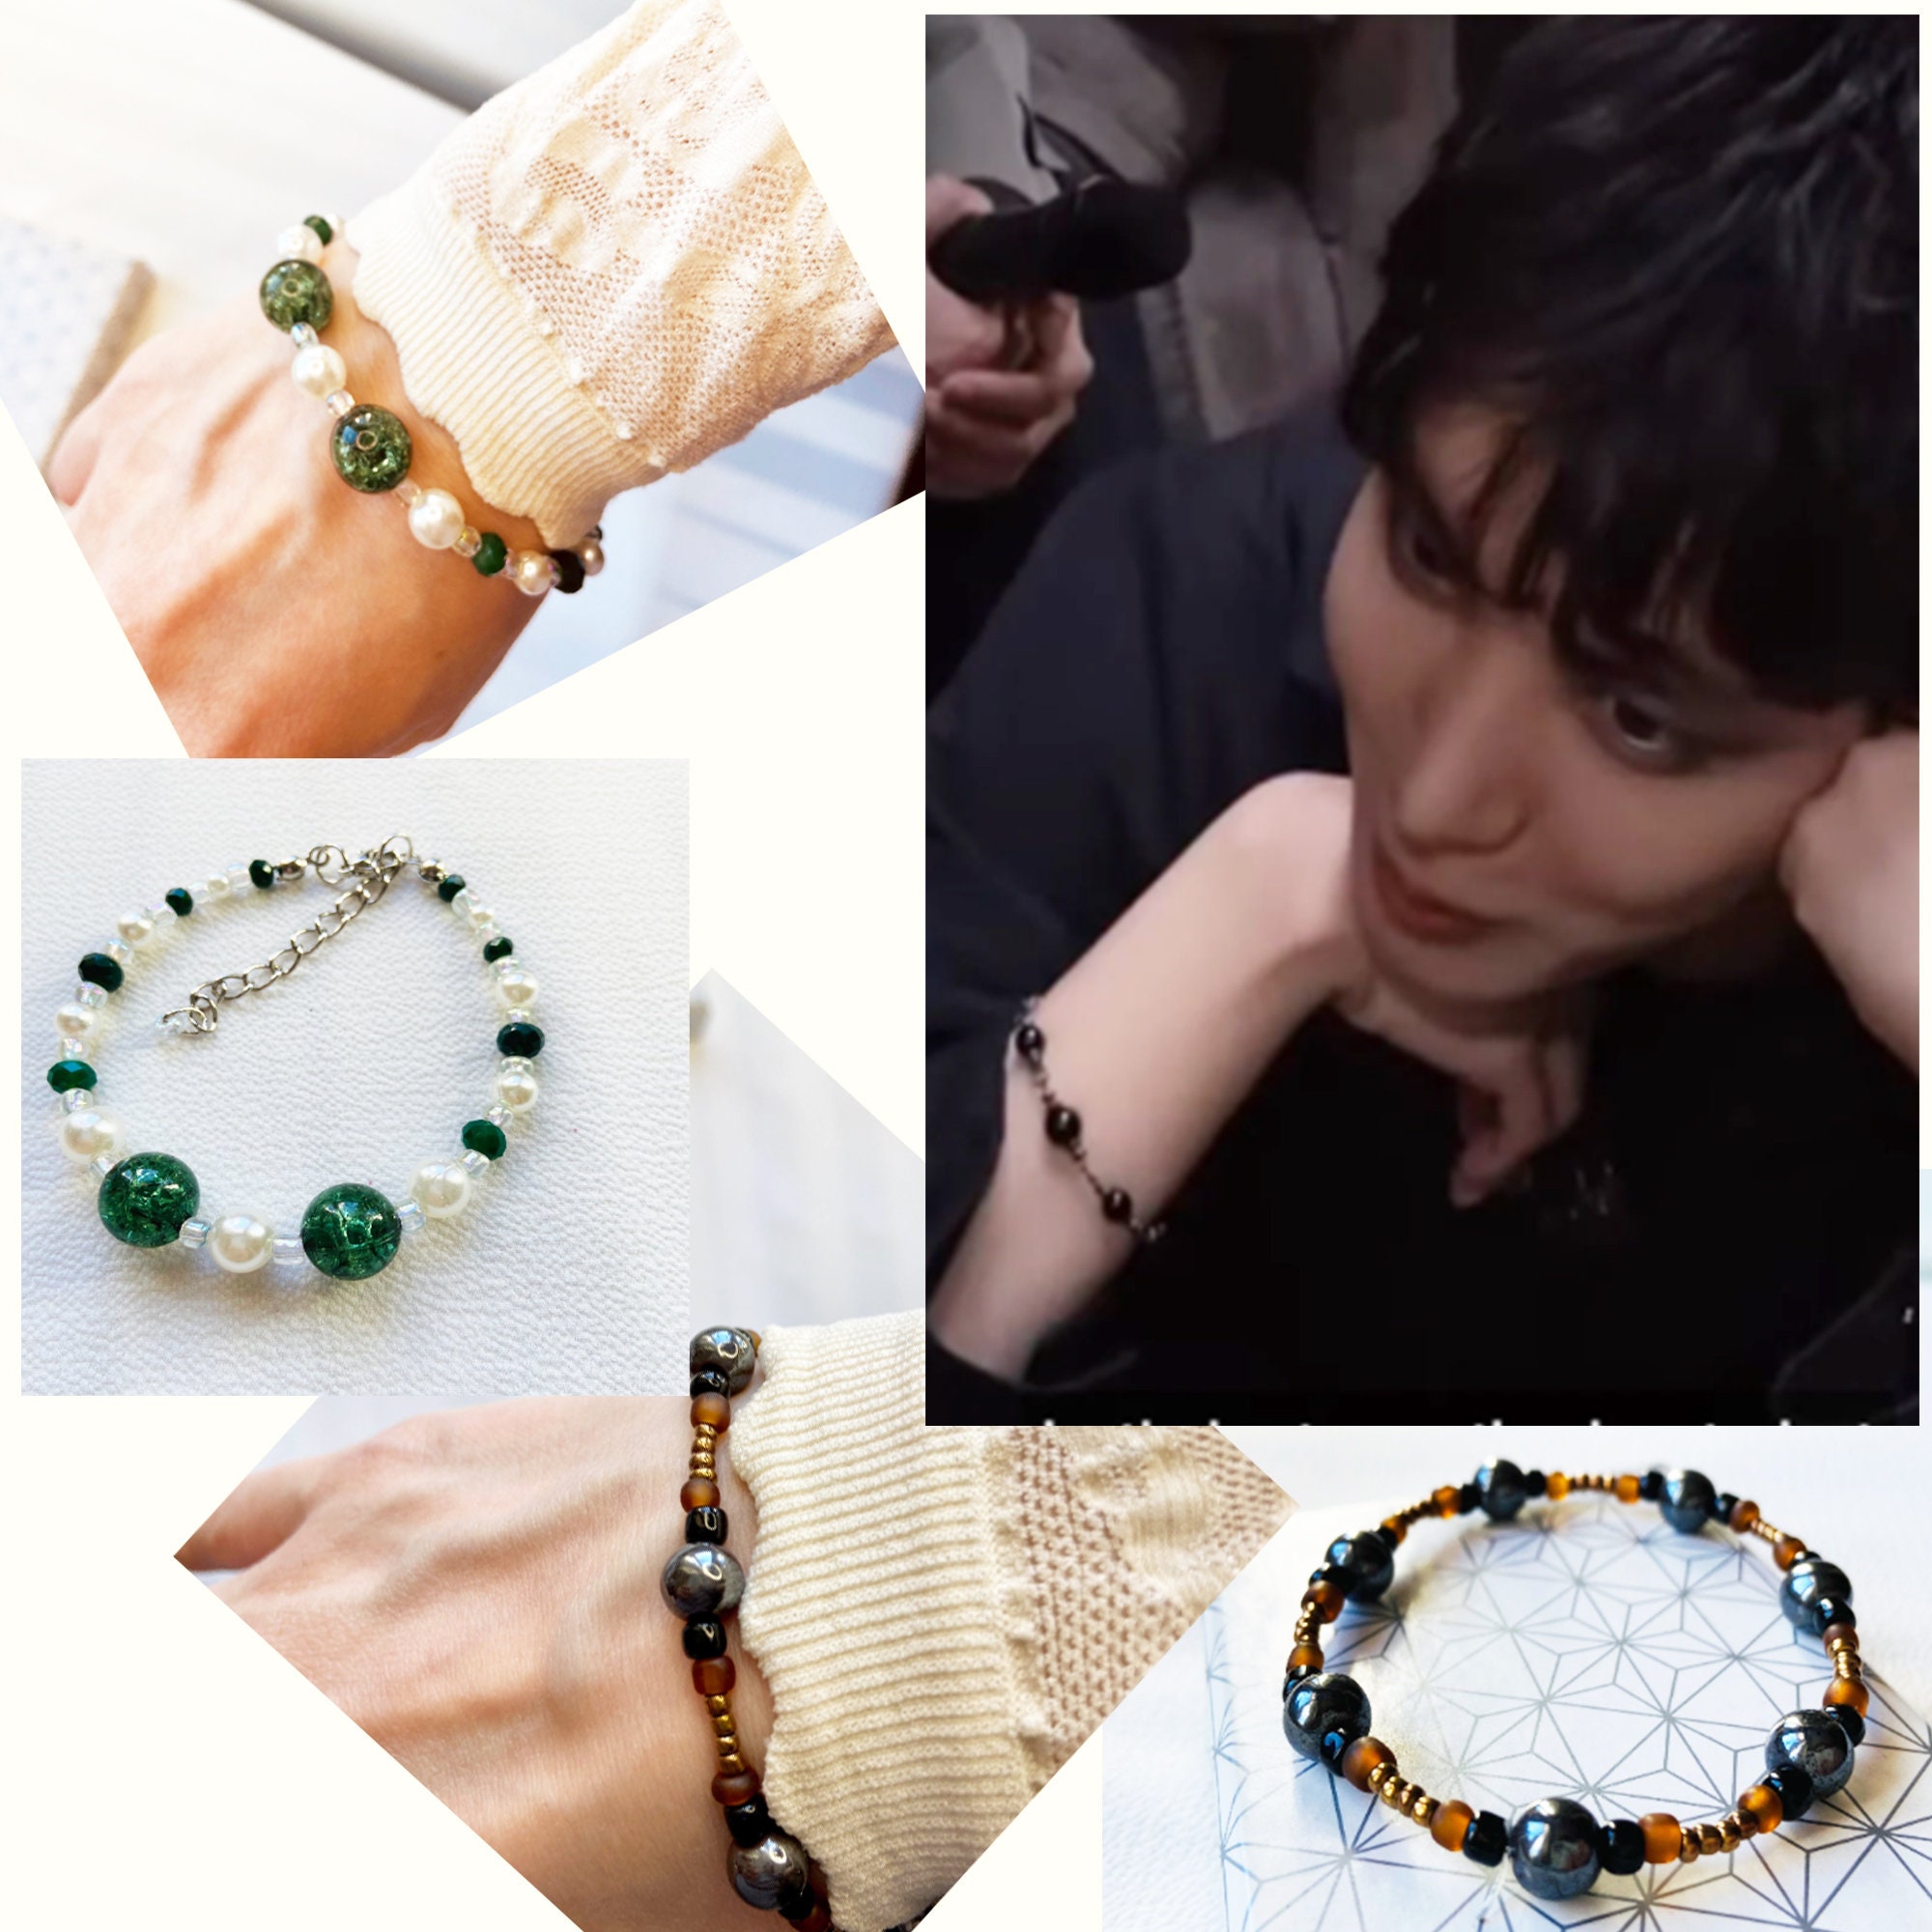 Hobicore — j-hope's iconic aesthetic serves looks and inspiration, by  Andie